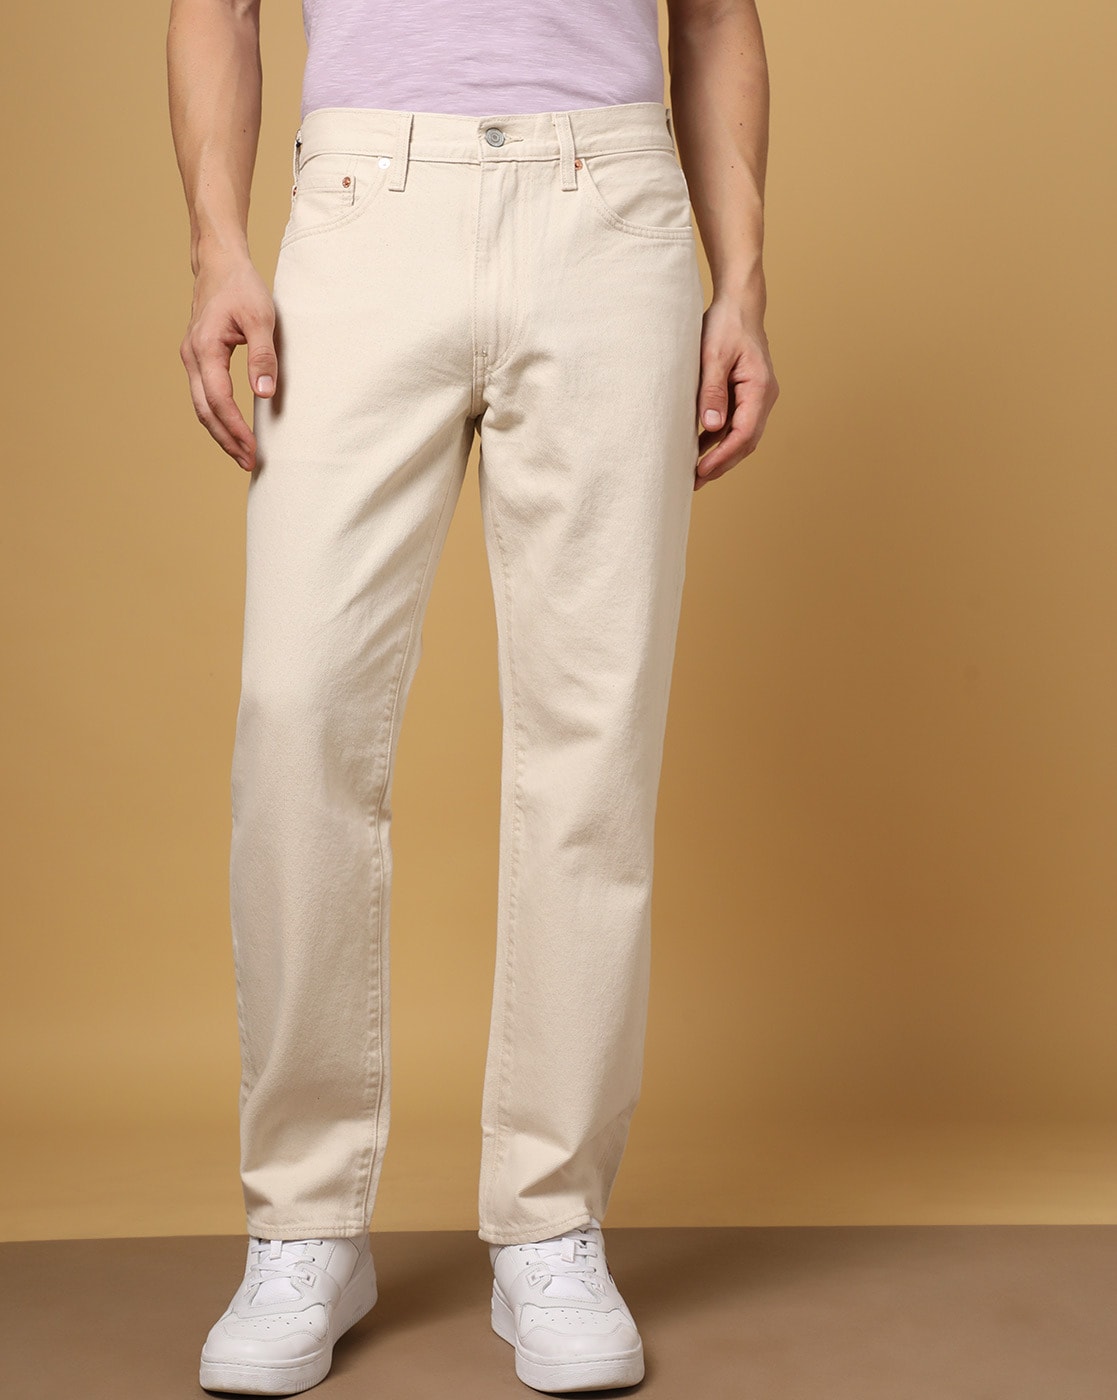 Buy Beige Jeans for by LEVIS Online | Ajio.com